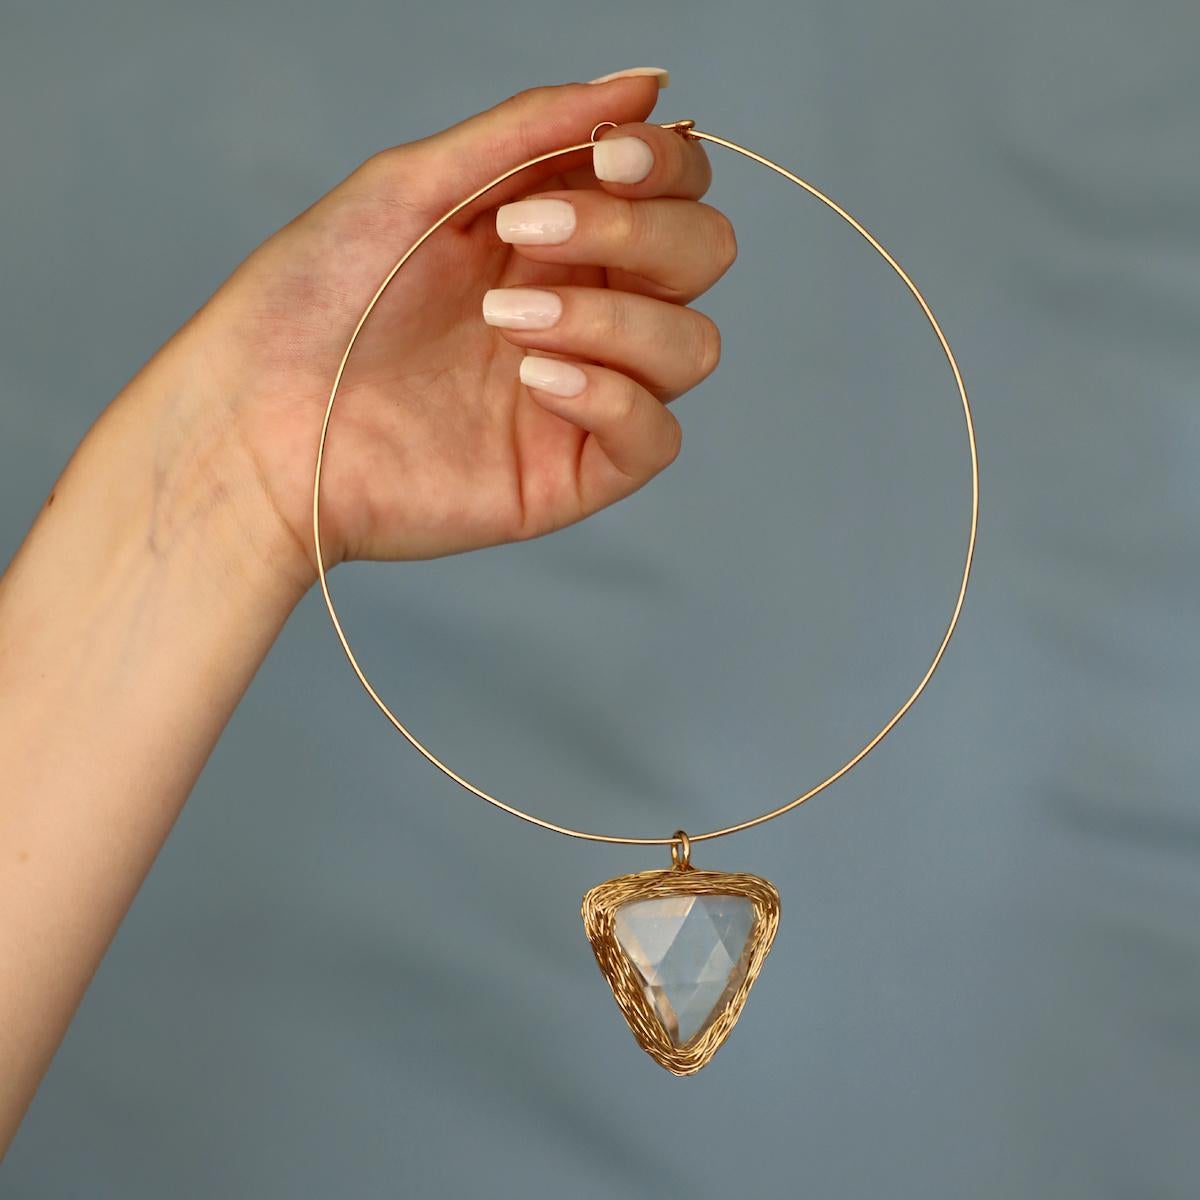 Uncut Triangle Rock Crystal choker & One-Off Necklace in 14kt Gold Cocktail Statement For Sale